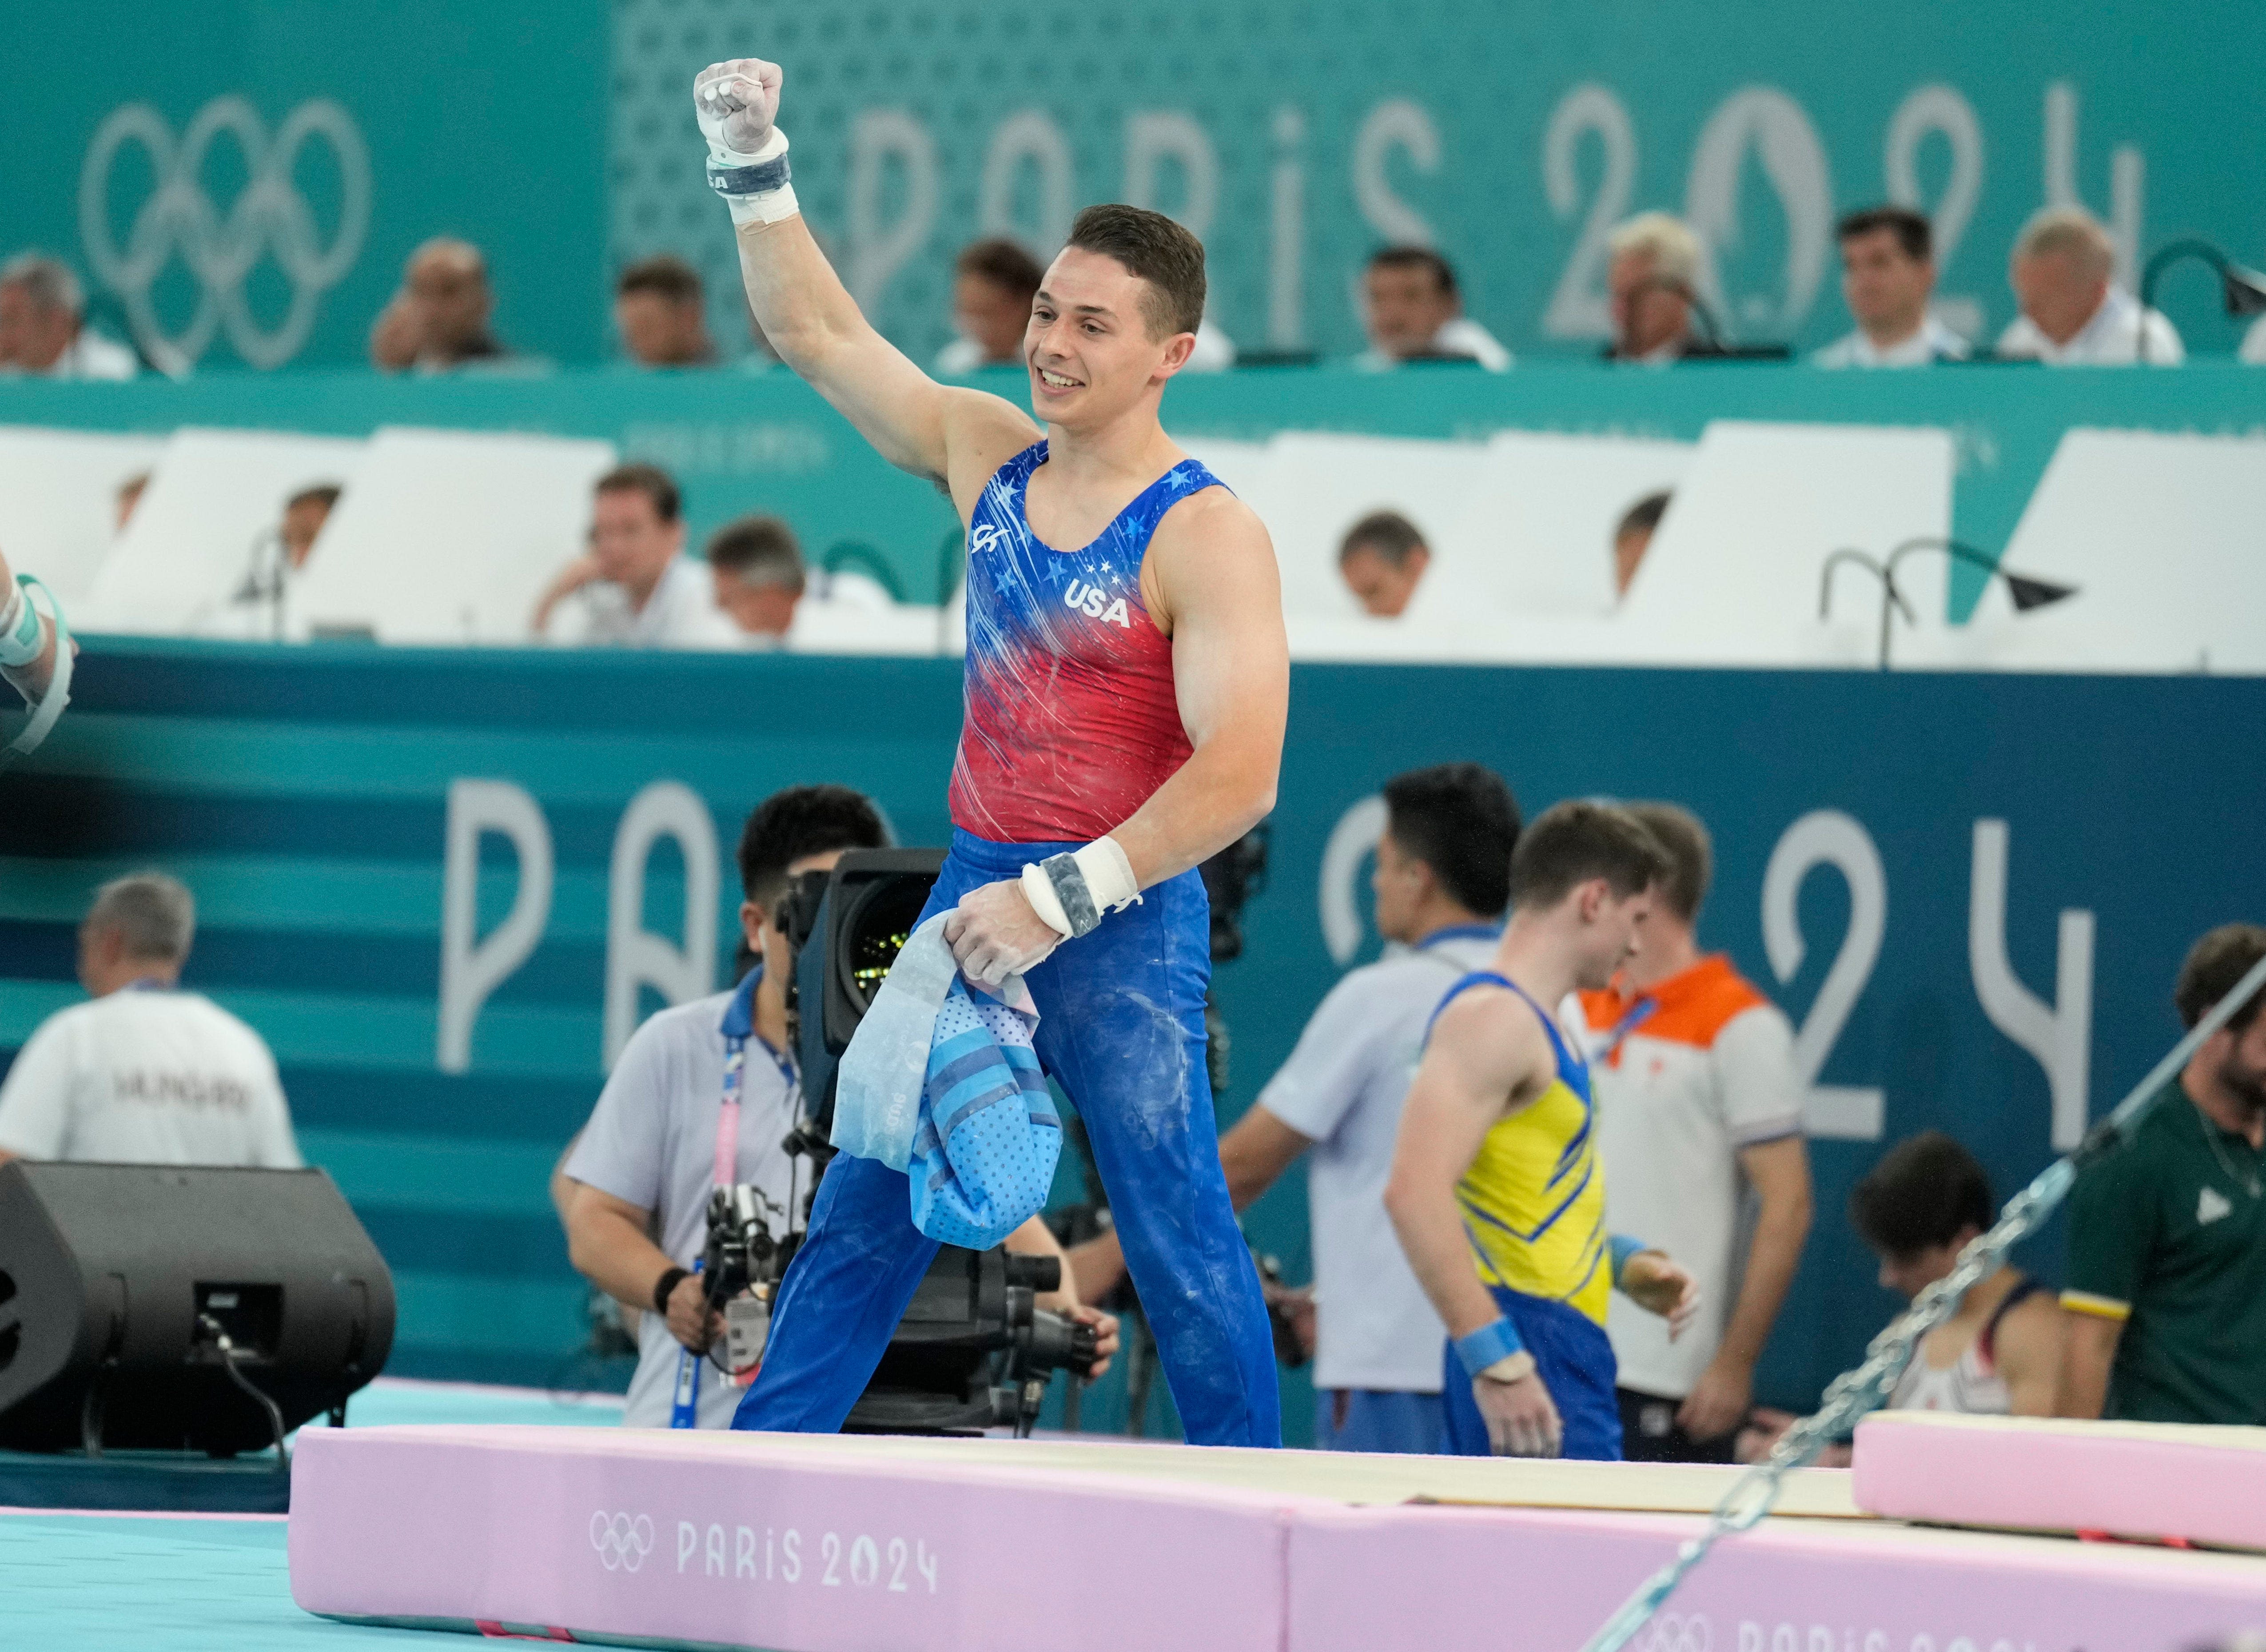 USA's Paul Juda after men's gymnastics all-around final: 'Experience of a lifetime'